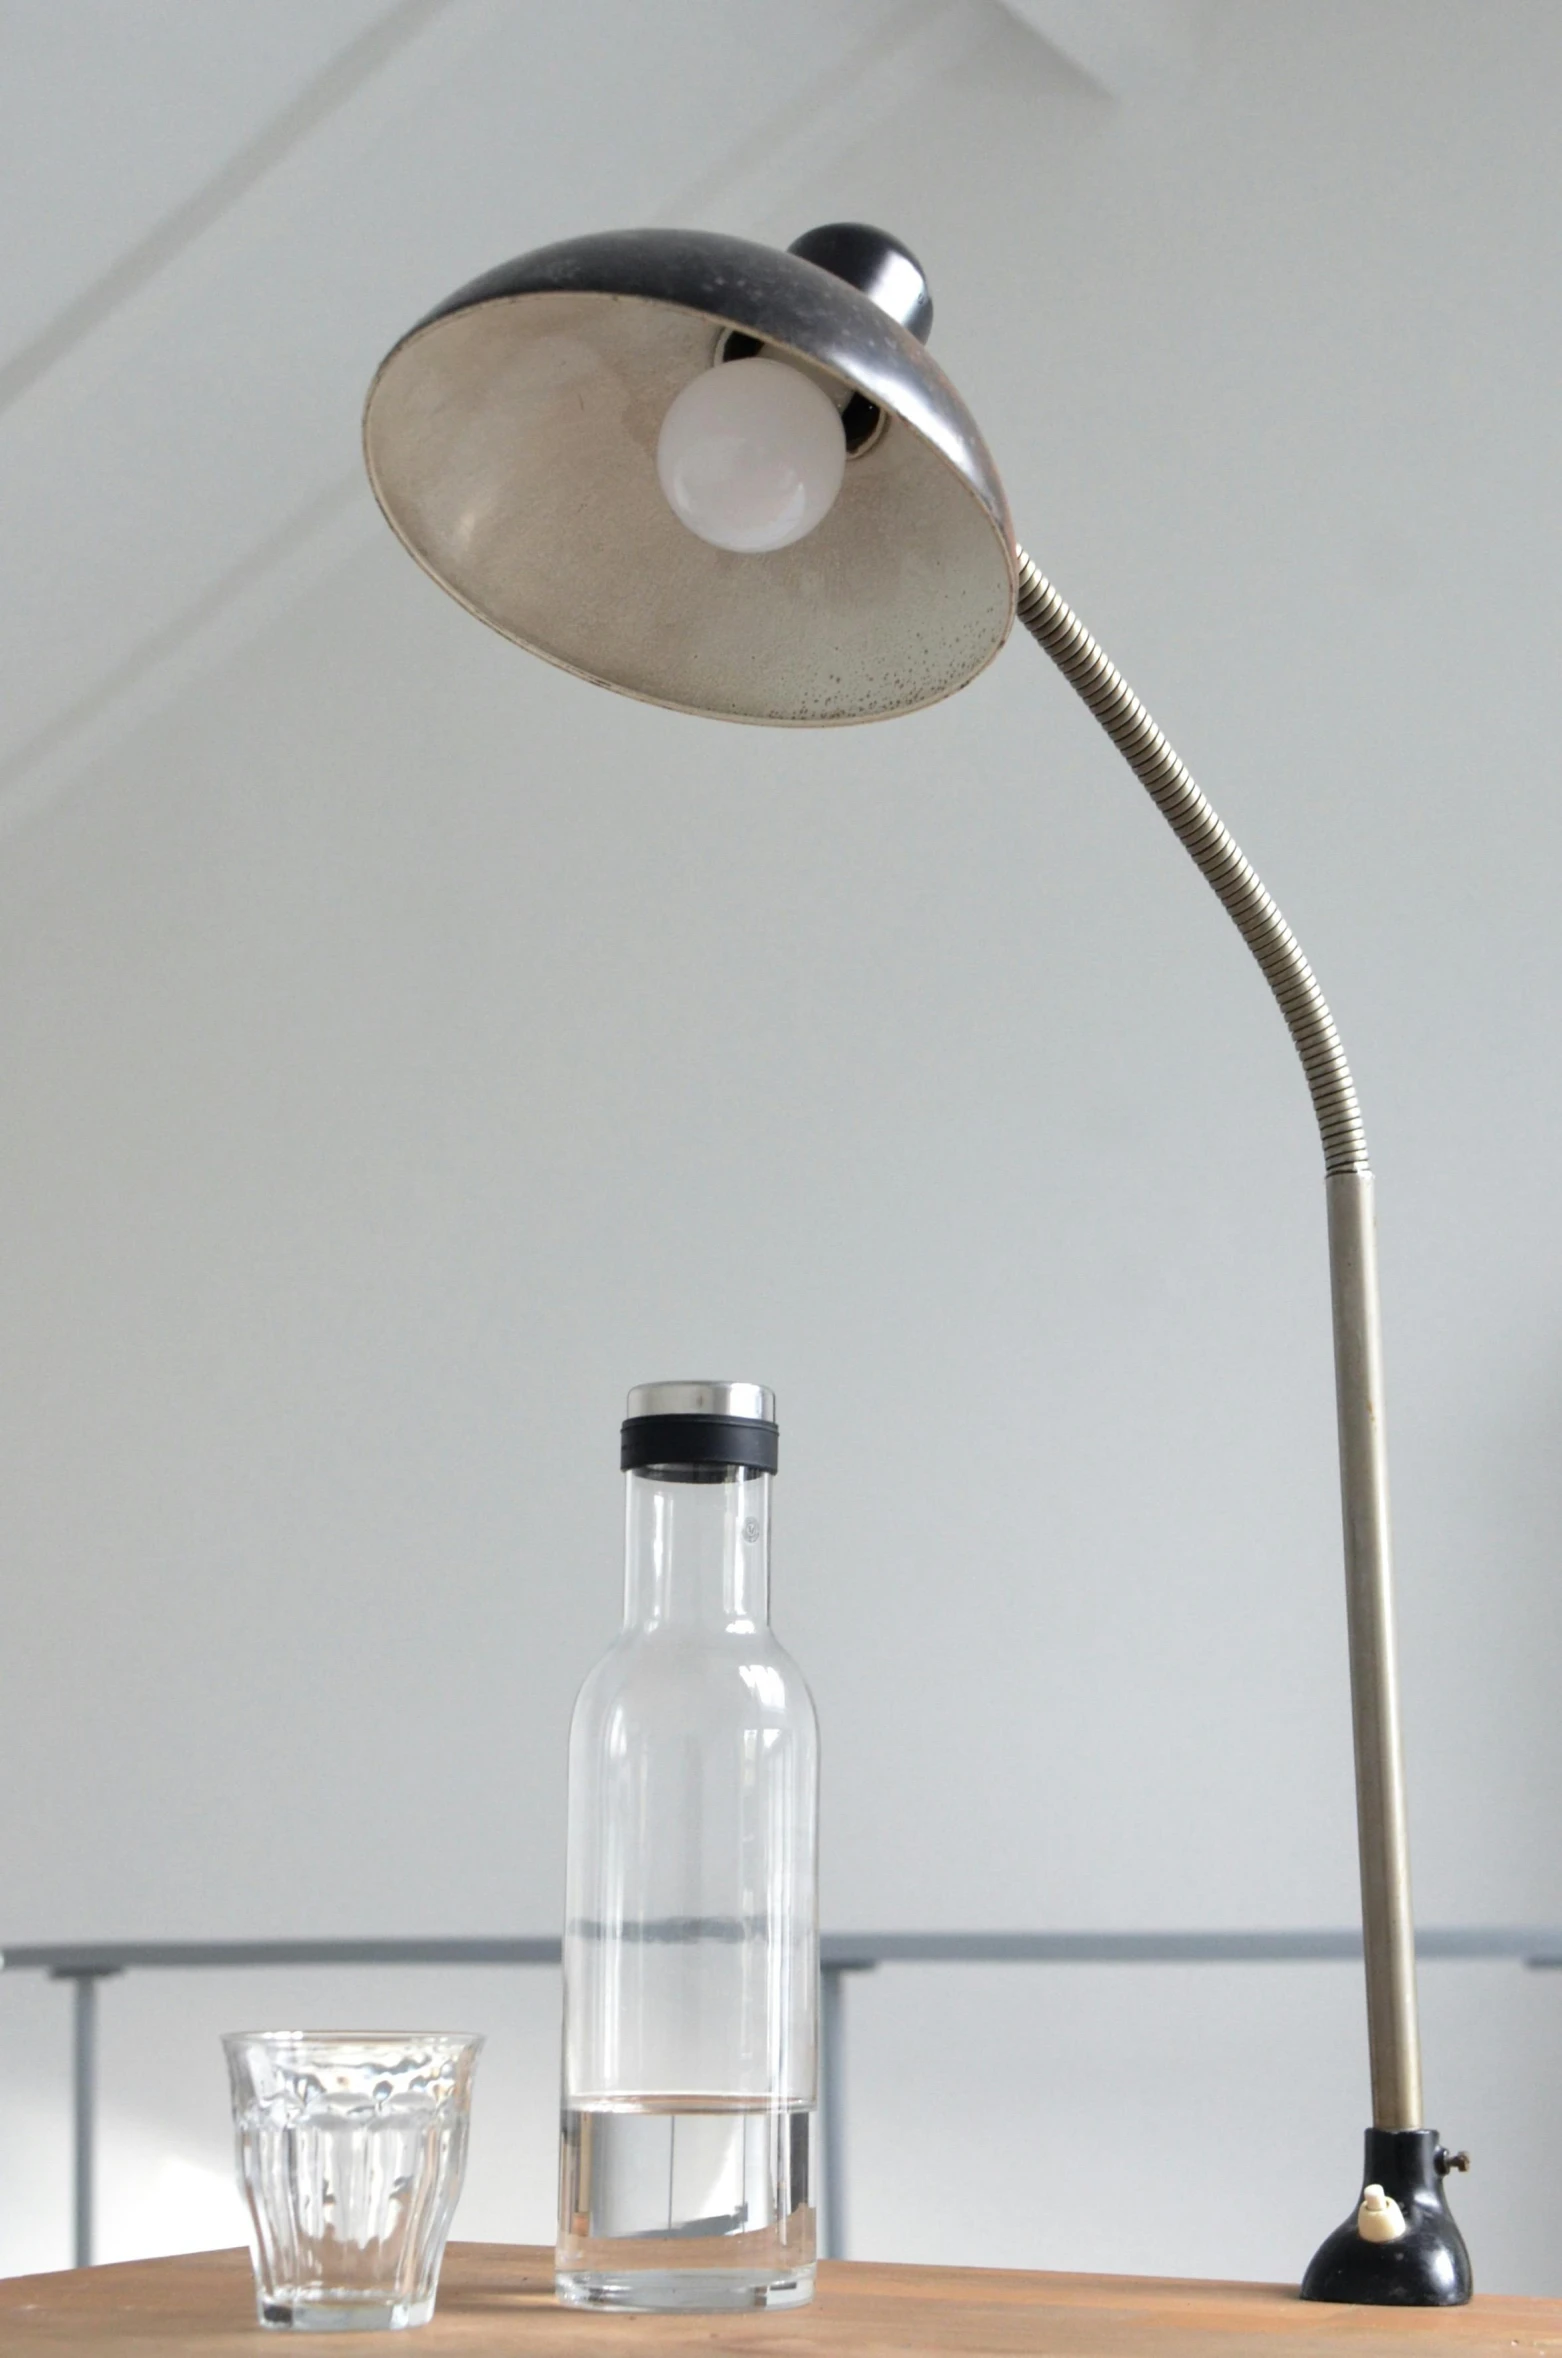 a lamp sitting on top of a wooden table next to a glass, an album cover, inspired by Constantin Hansen, minimalism, stainless steal, image apothecary, hoog detail, lamp ( ( ( gym ) ) ) )